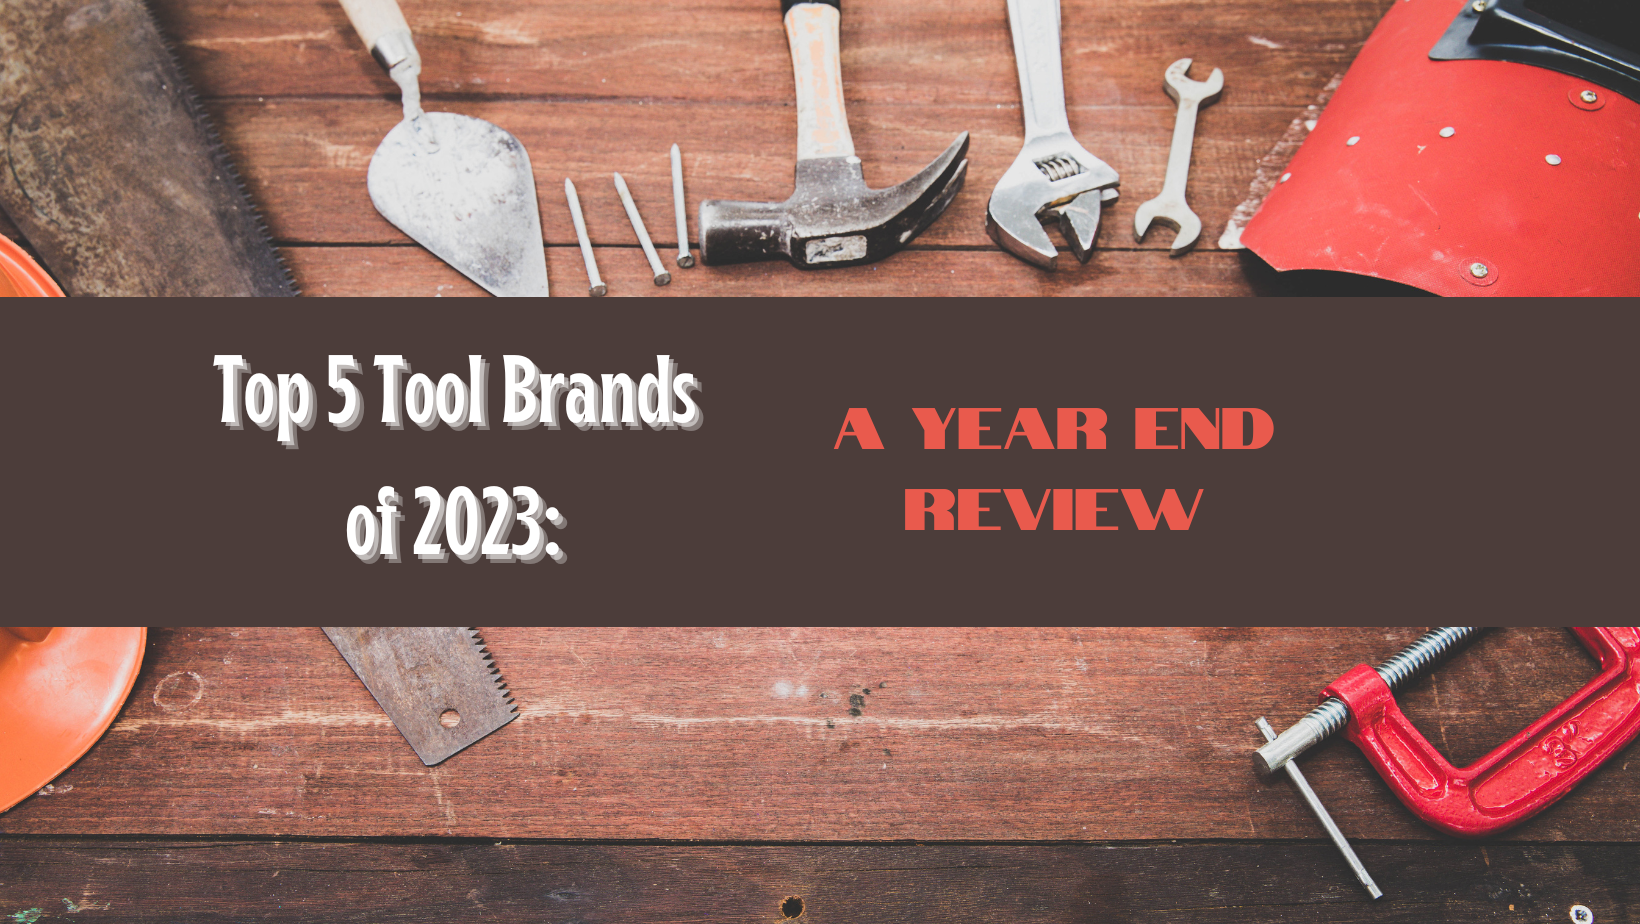 Top 5 Tool Brands of 2023: A Year-End Review